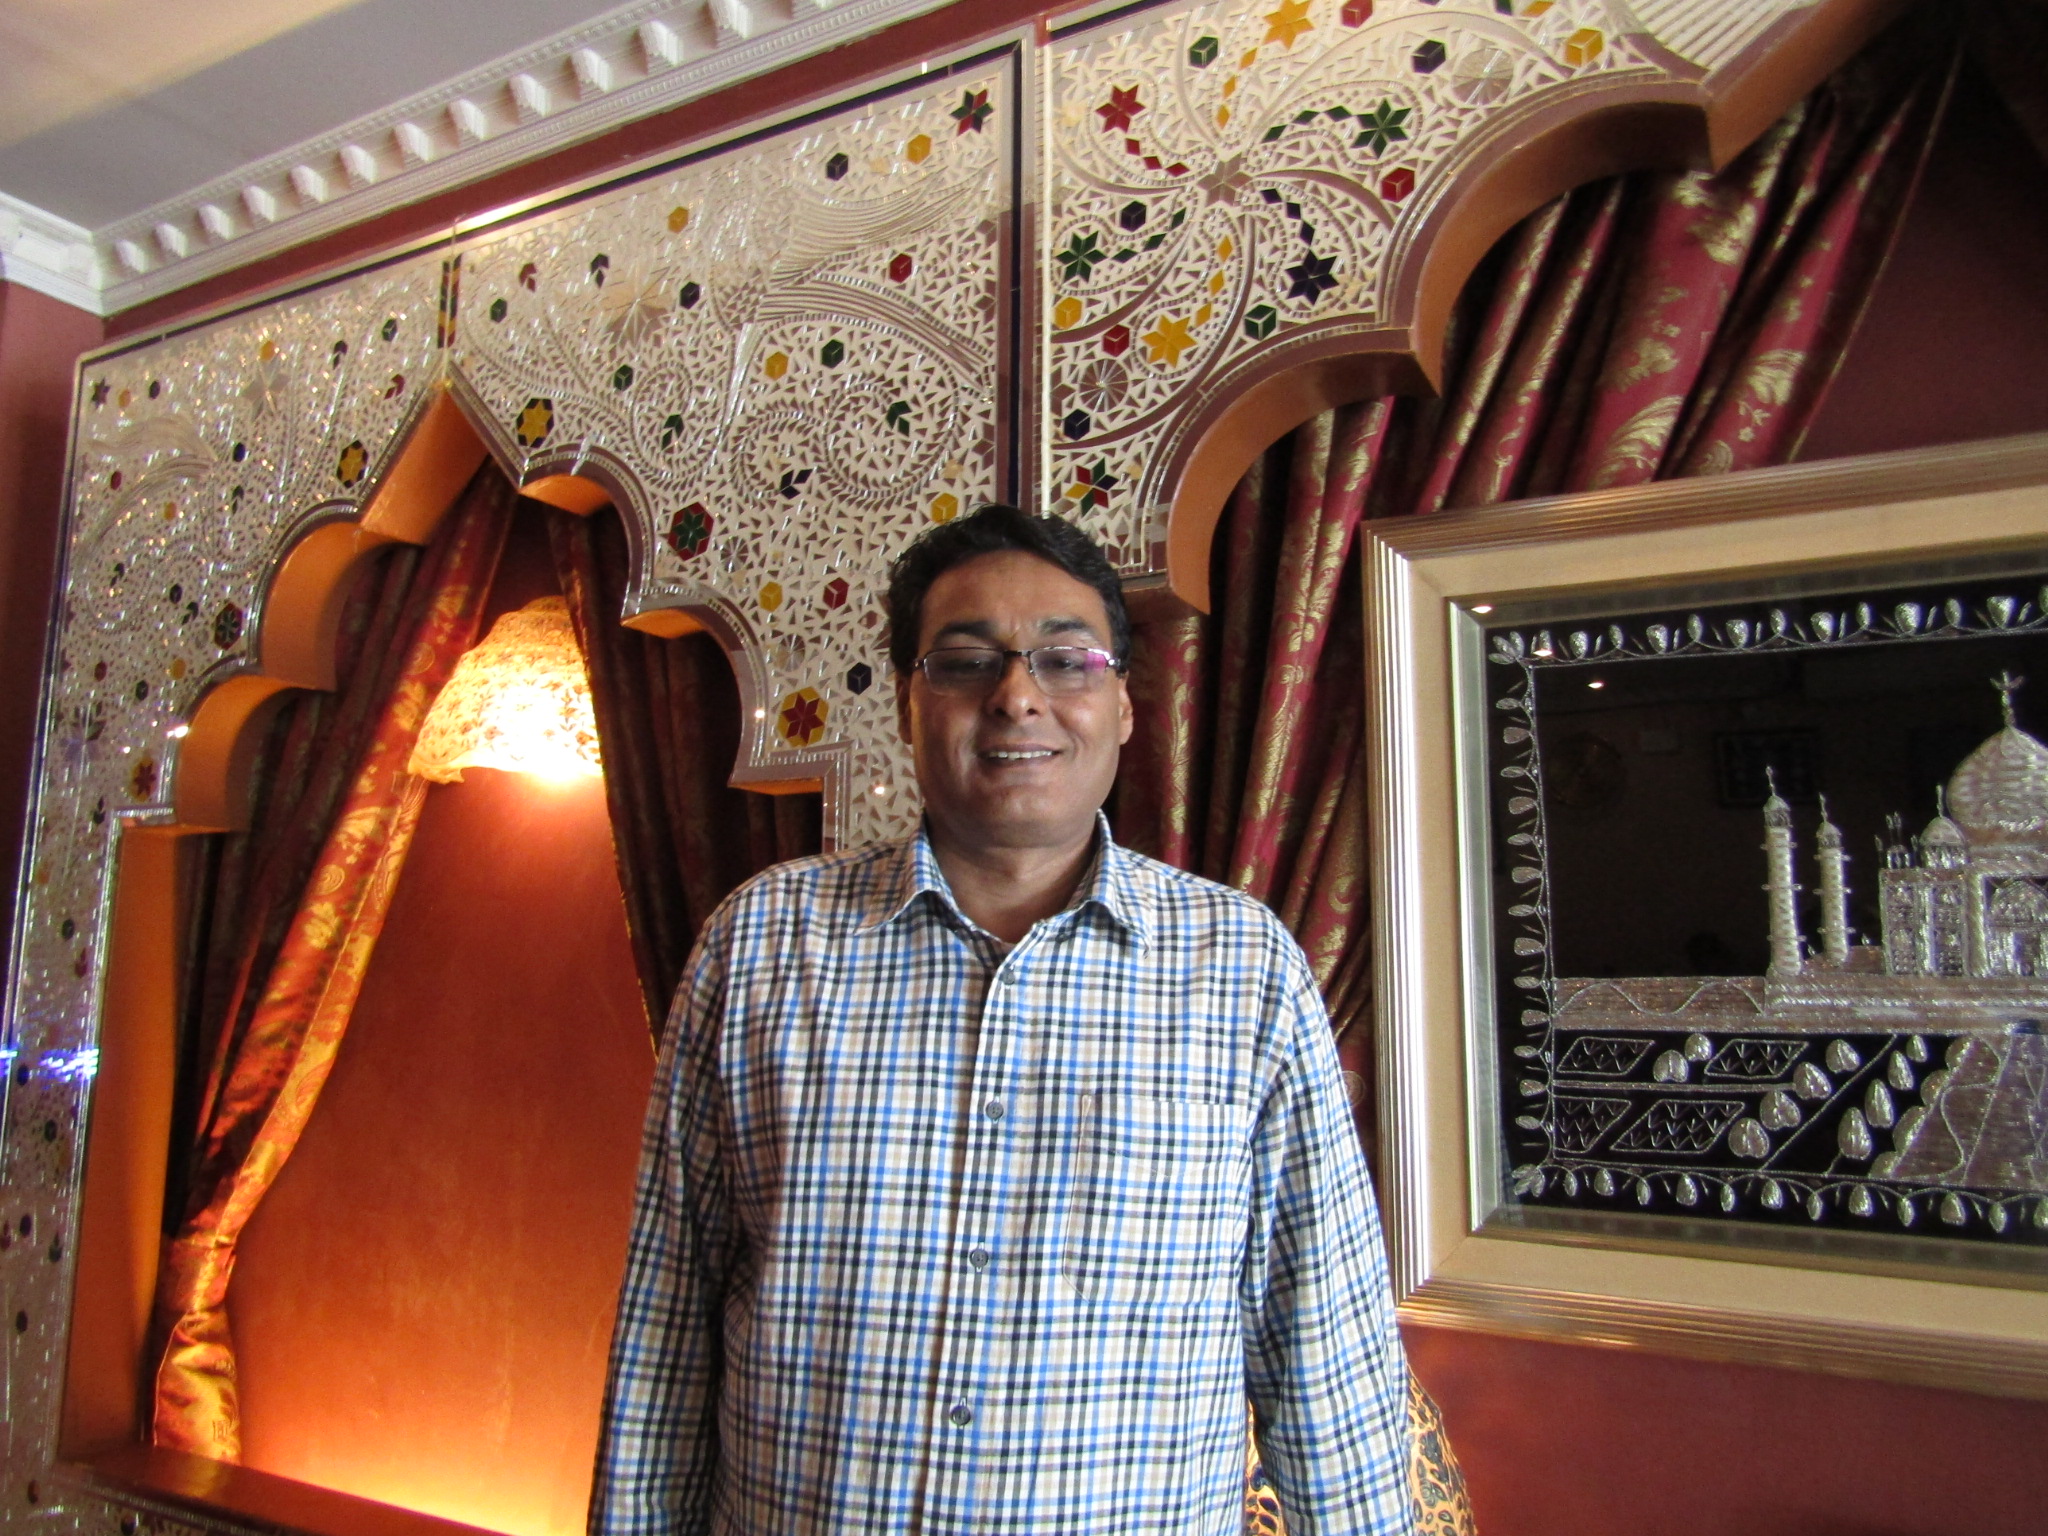 Shahid P. Chaudhry (Perry), Owner of Koh-e-noor Restaurant